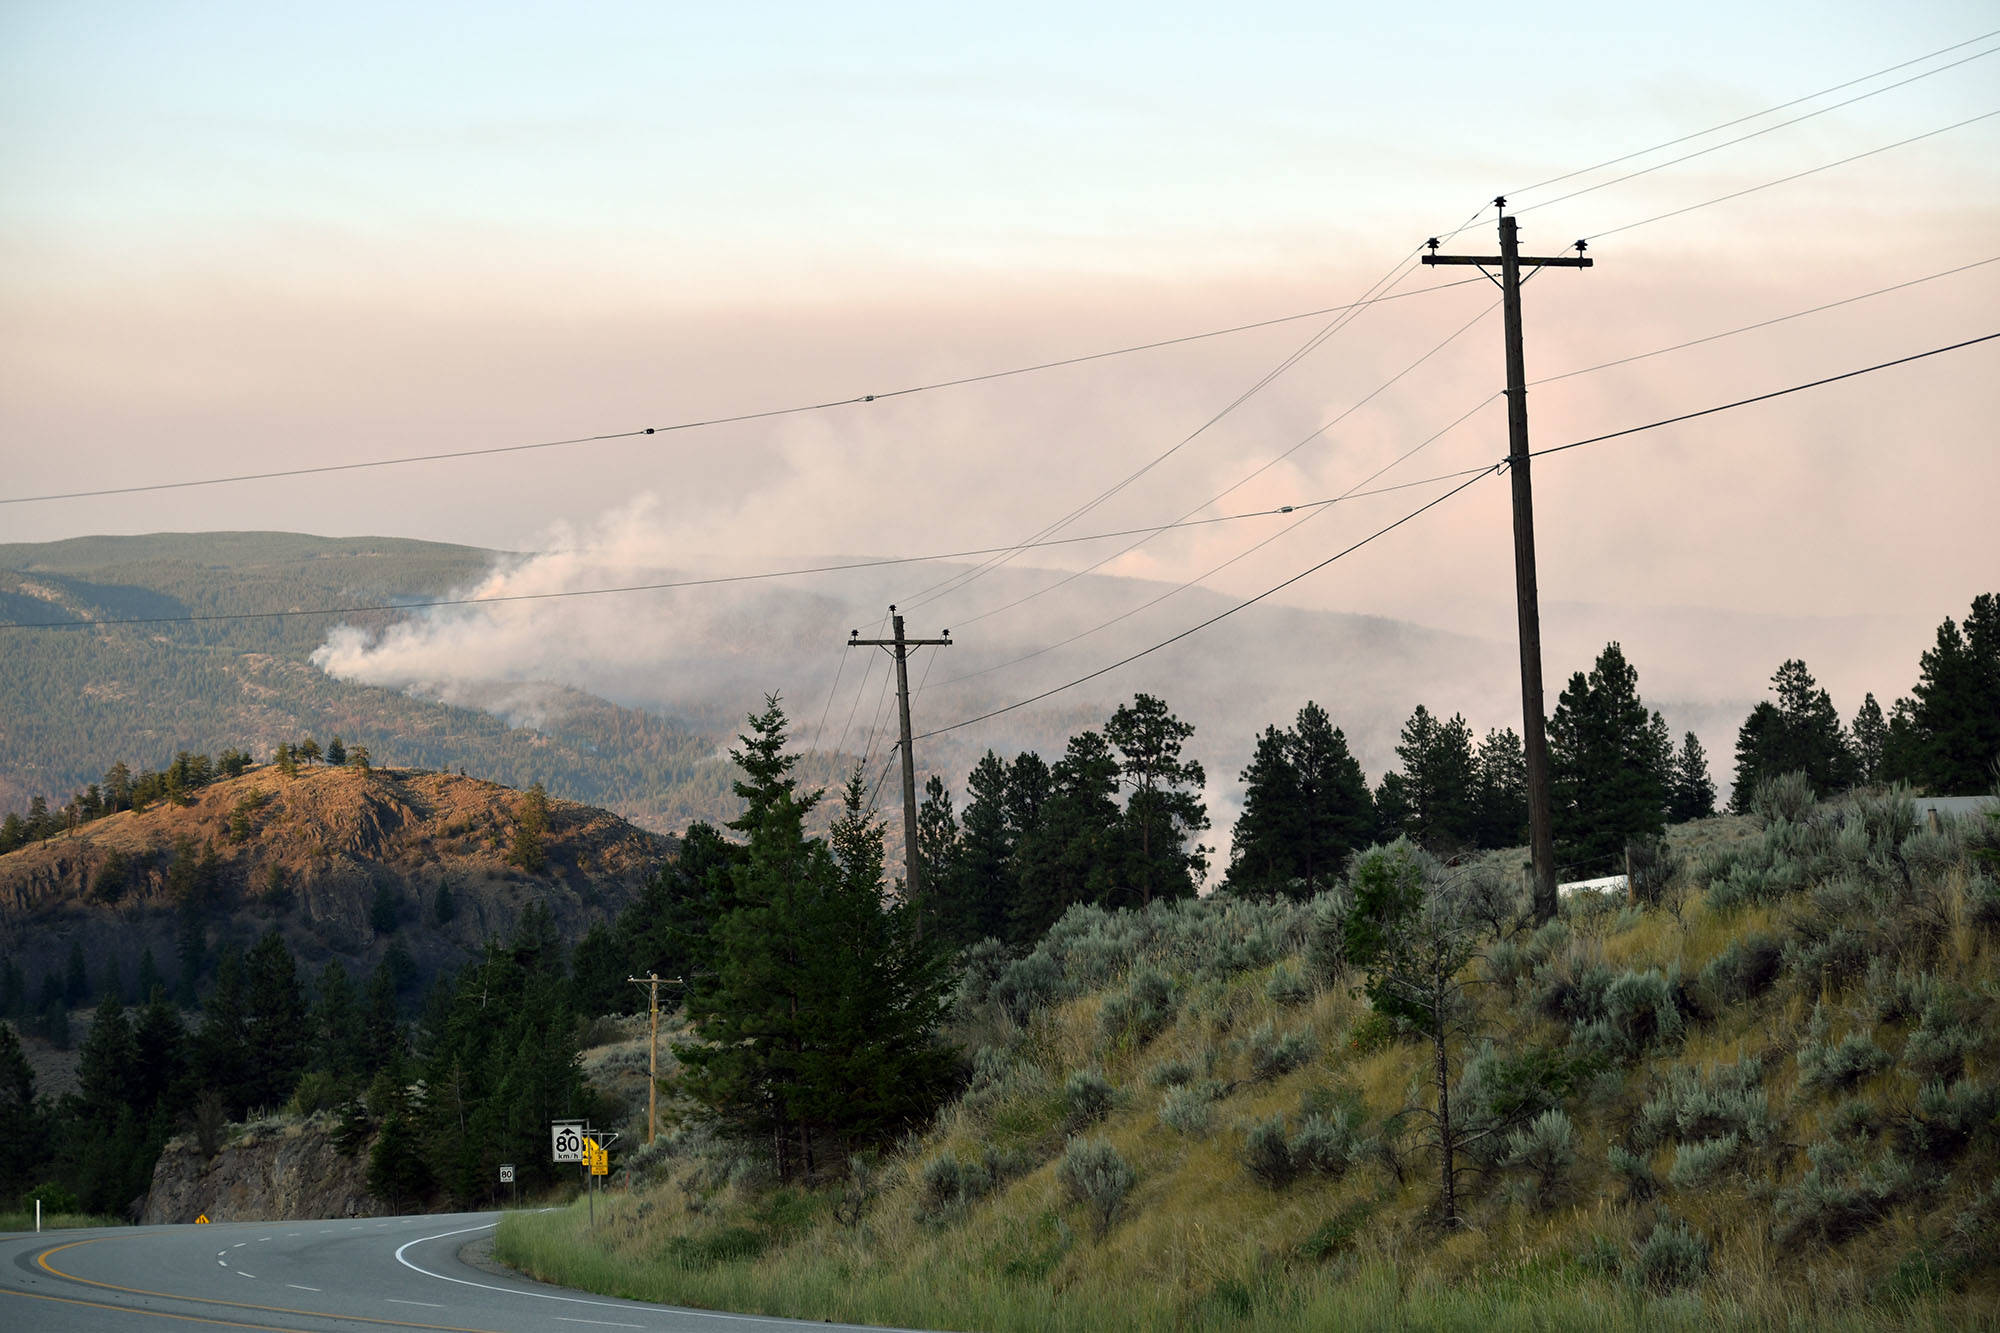 The Thomas Creek Fire seen from Highway 3 on Thursday evening, July 15. (Brennan Phillips - Western News)